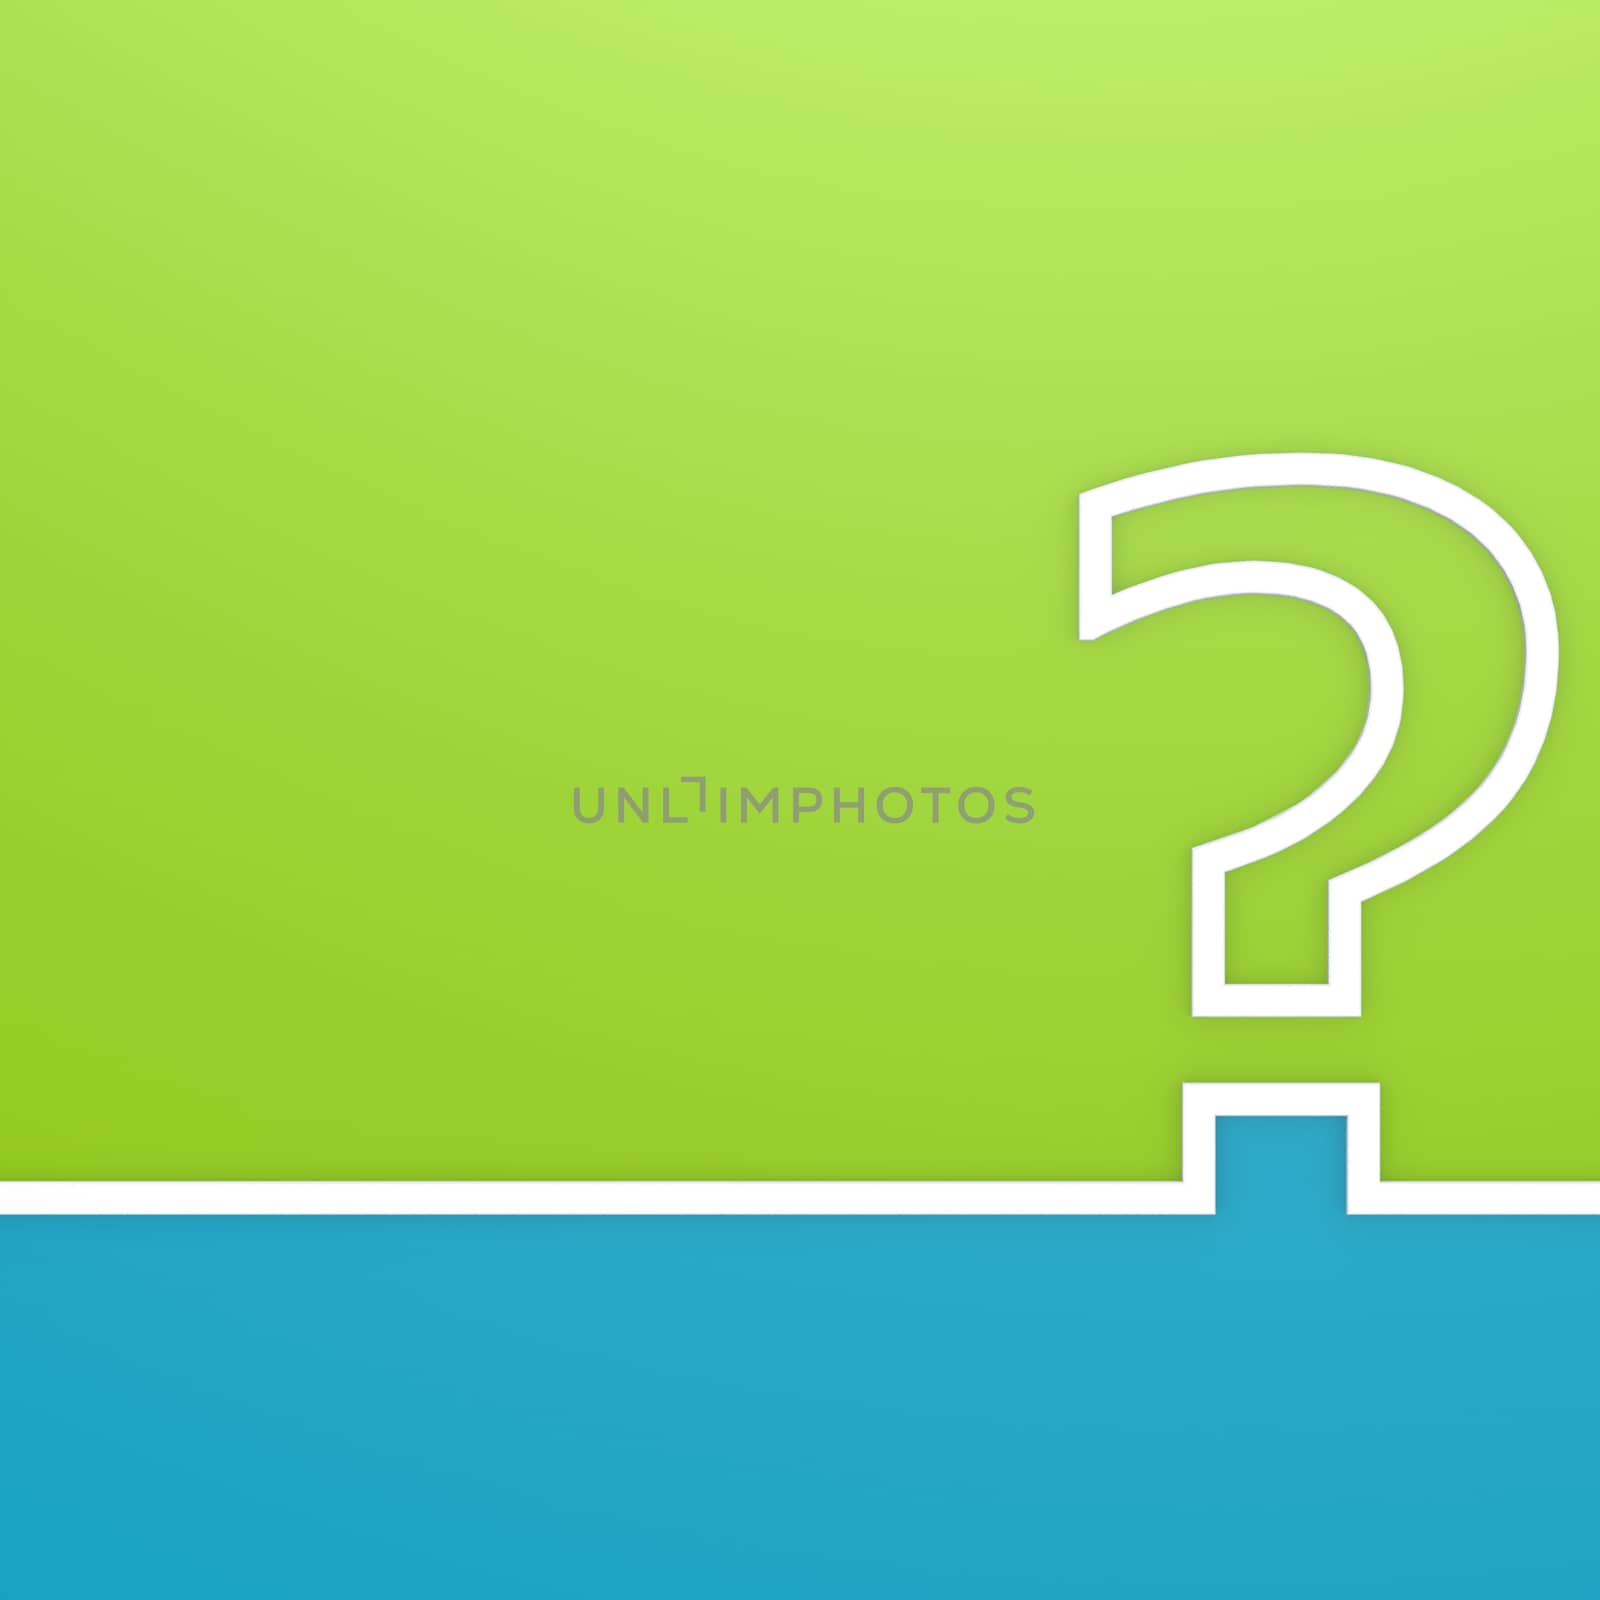 Question mark on green and blue background image, 3d rendering